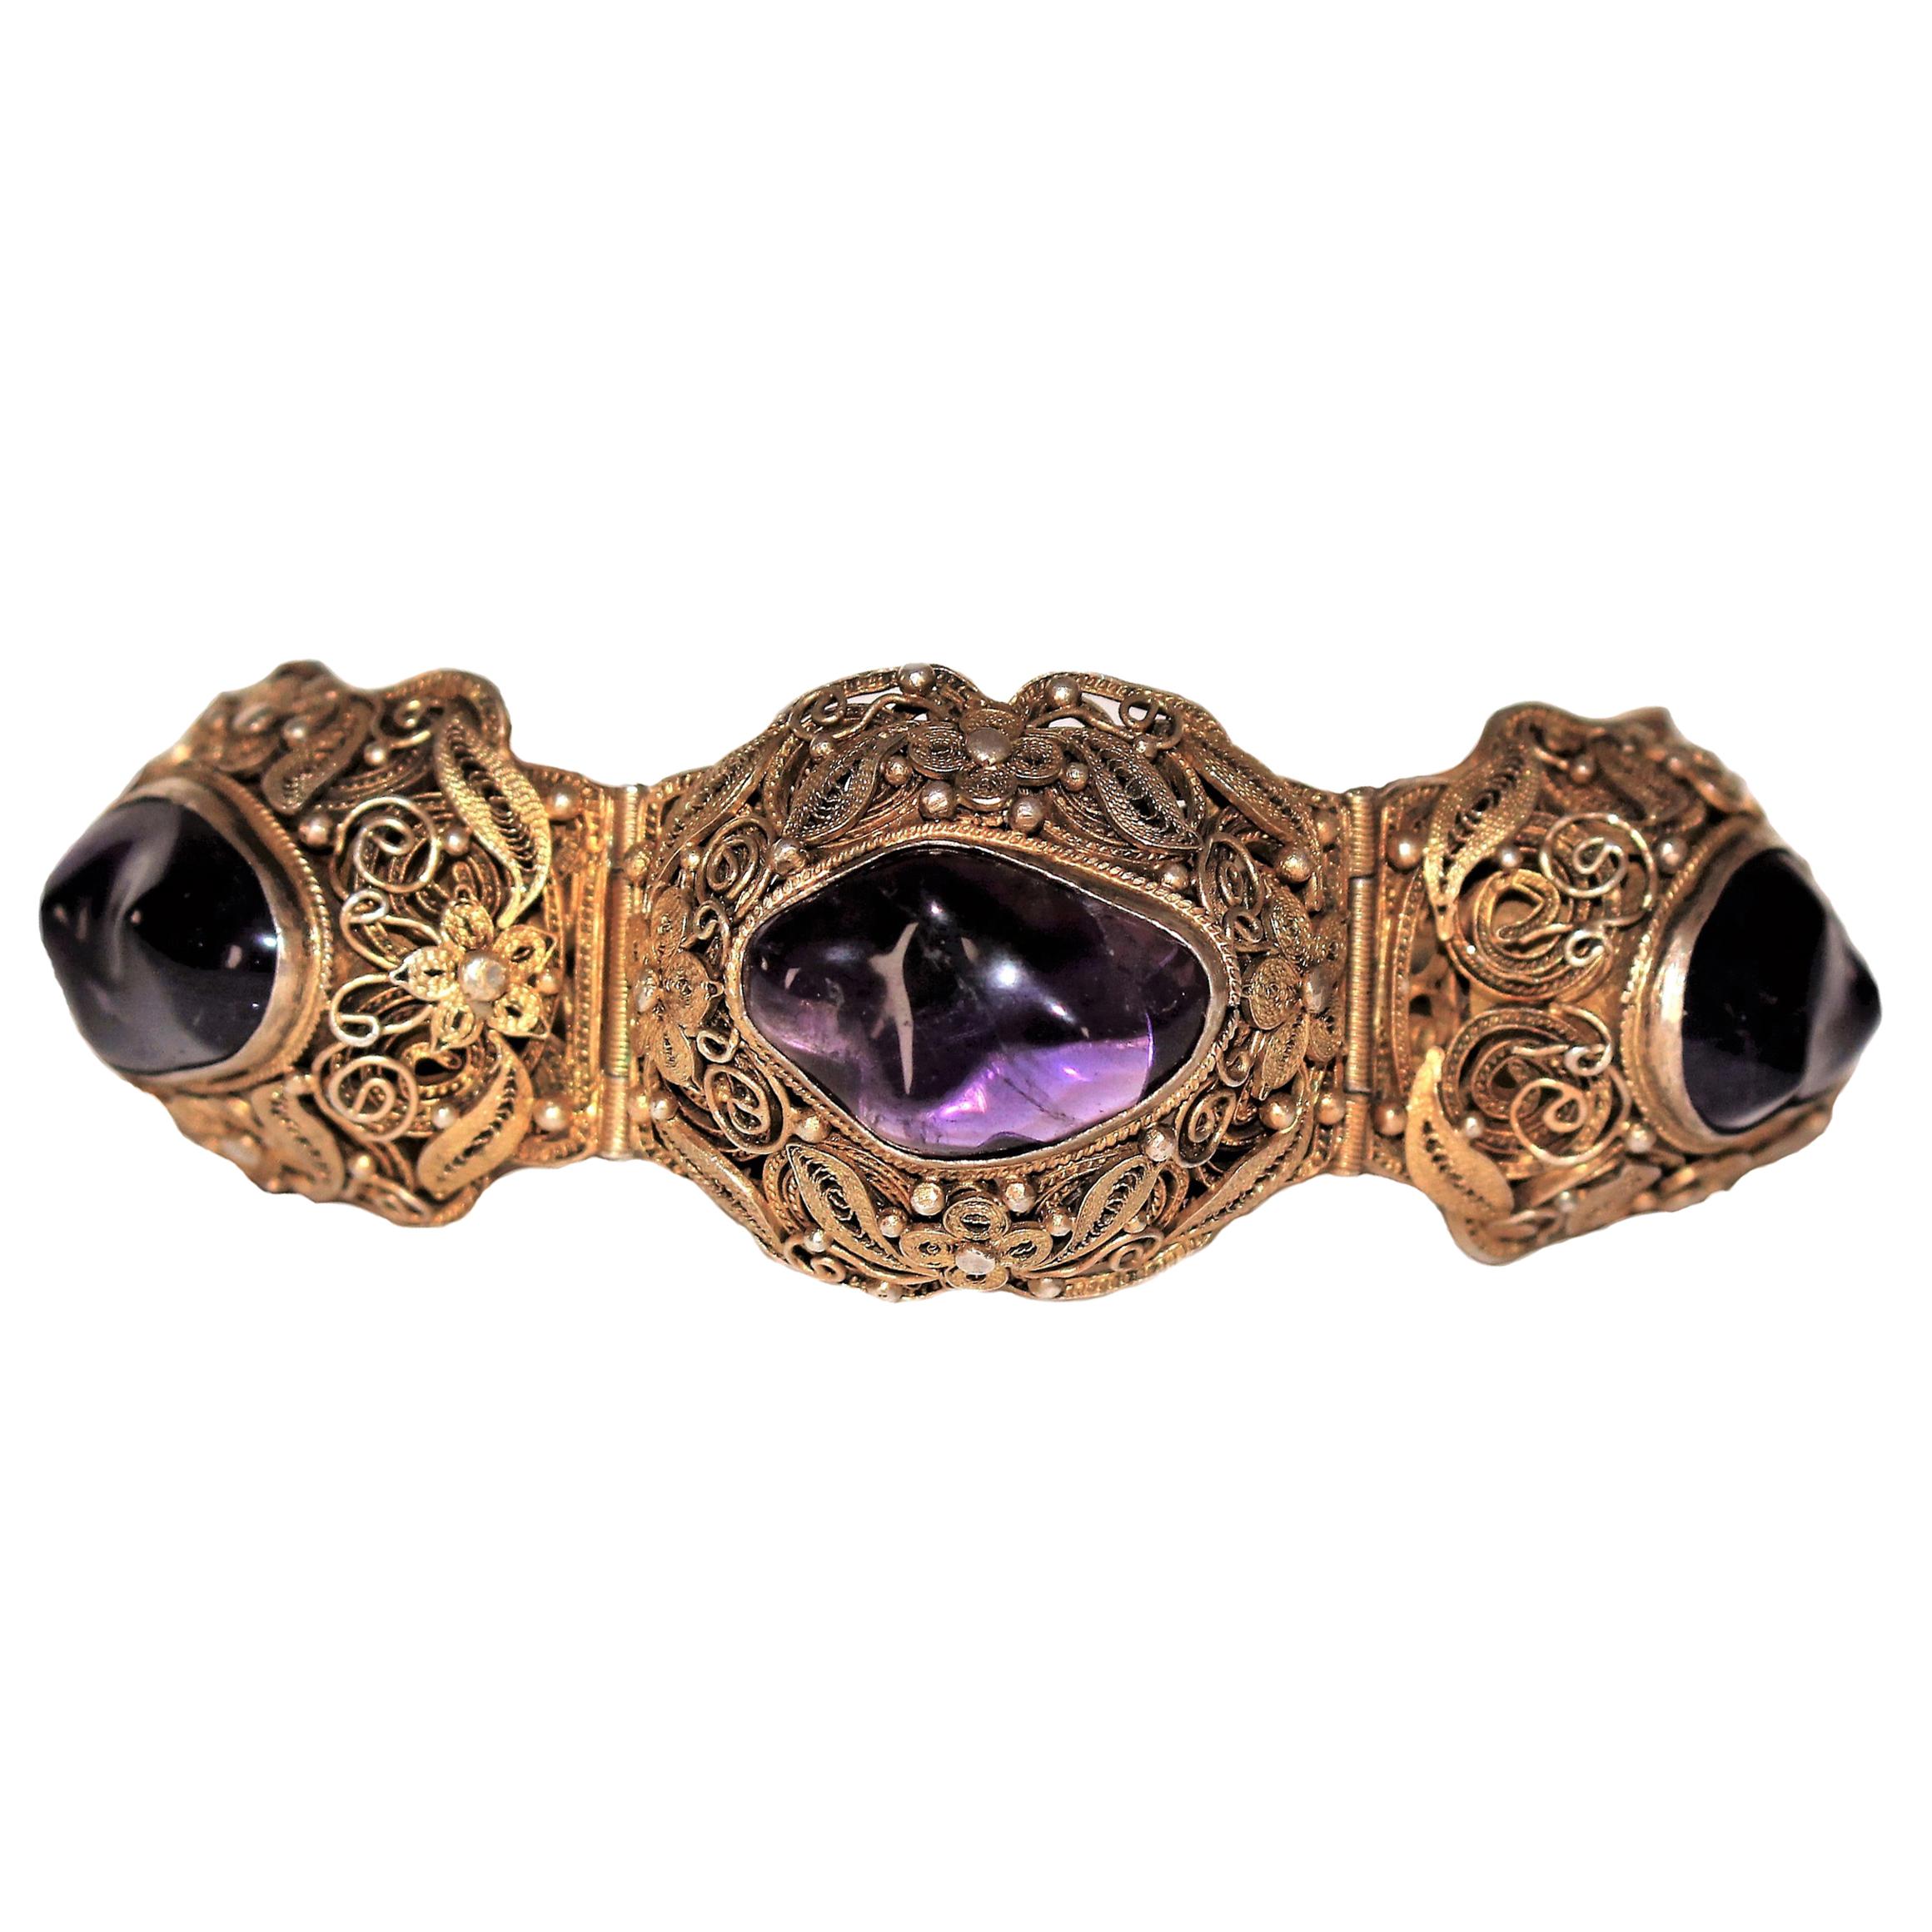 Circa 1940s Chinese Gold-Plated Sterling Silver Amethyst Bracelet For Sale